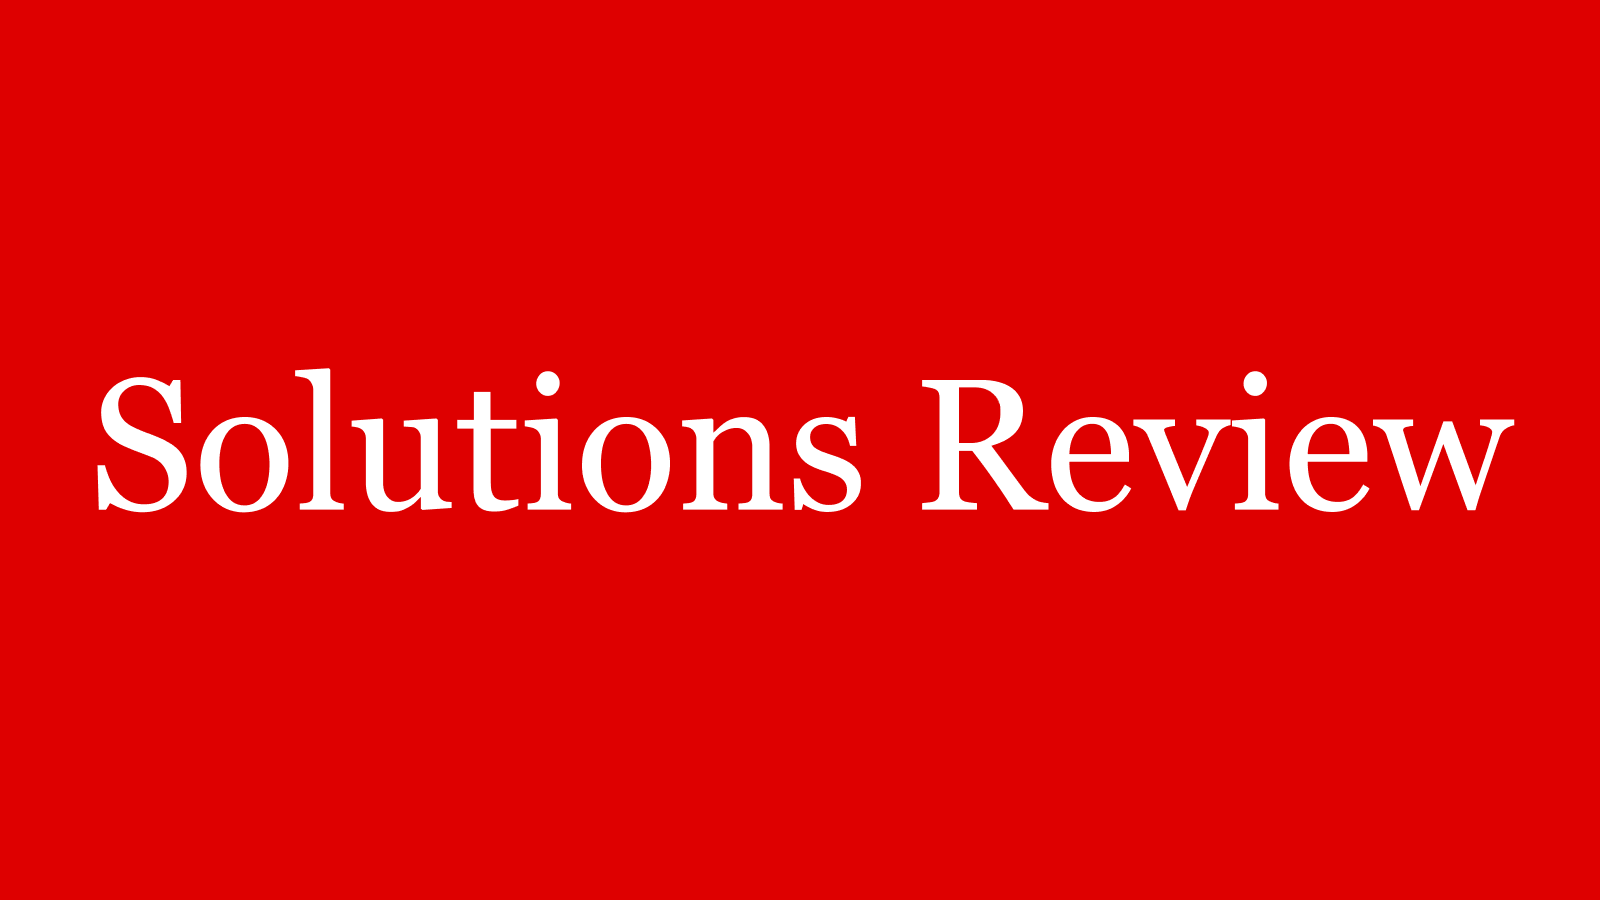 Solutions Review Logo